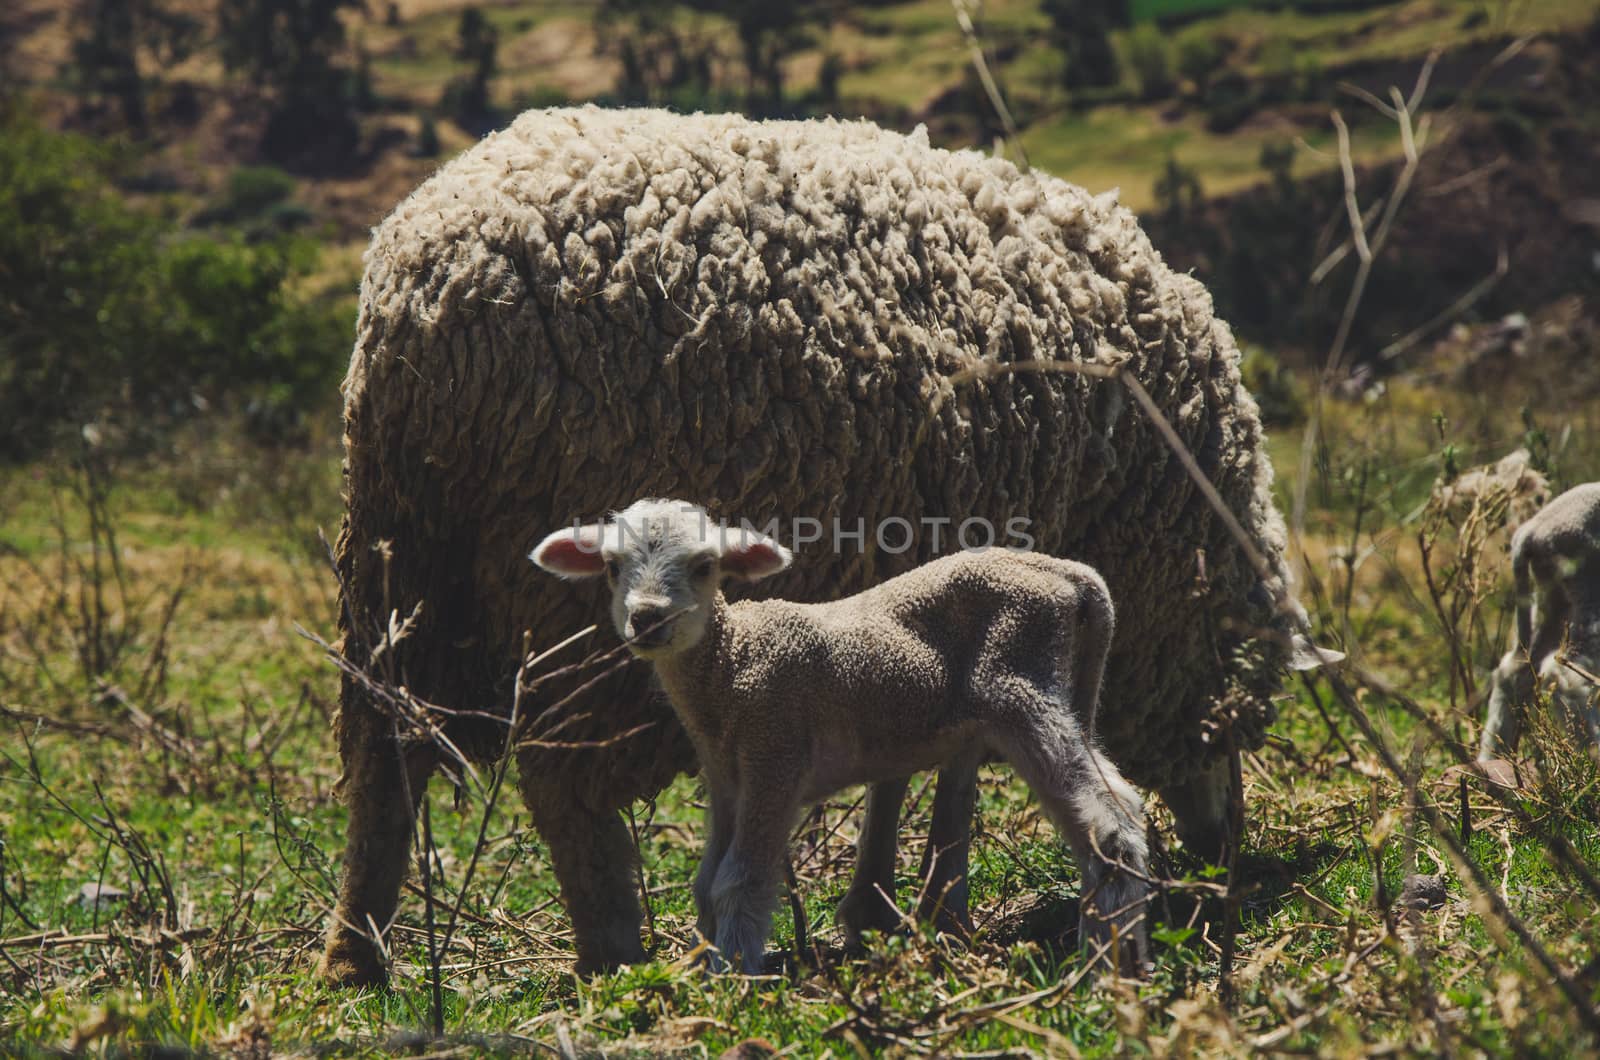 A small sheep and its mother among the bushes